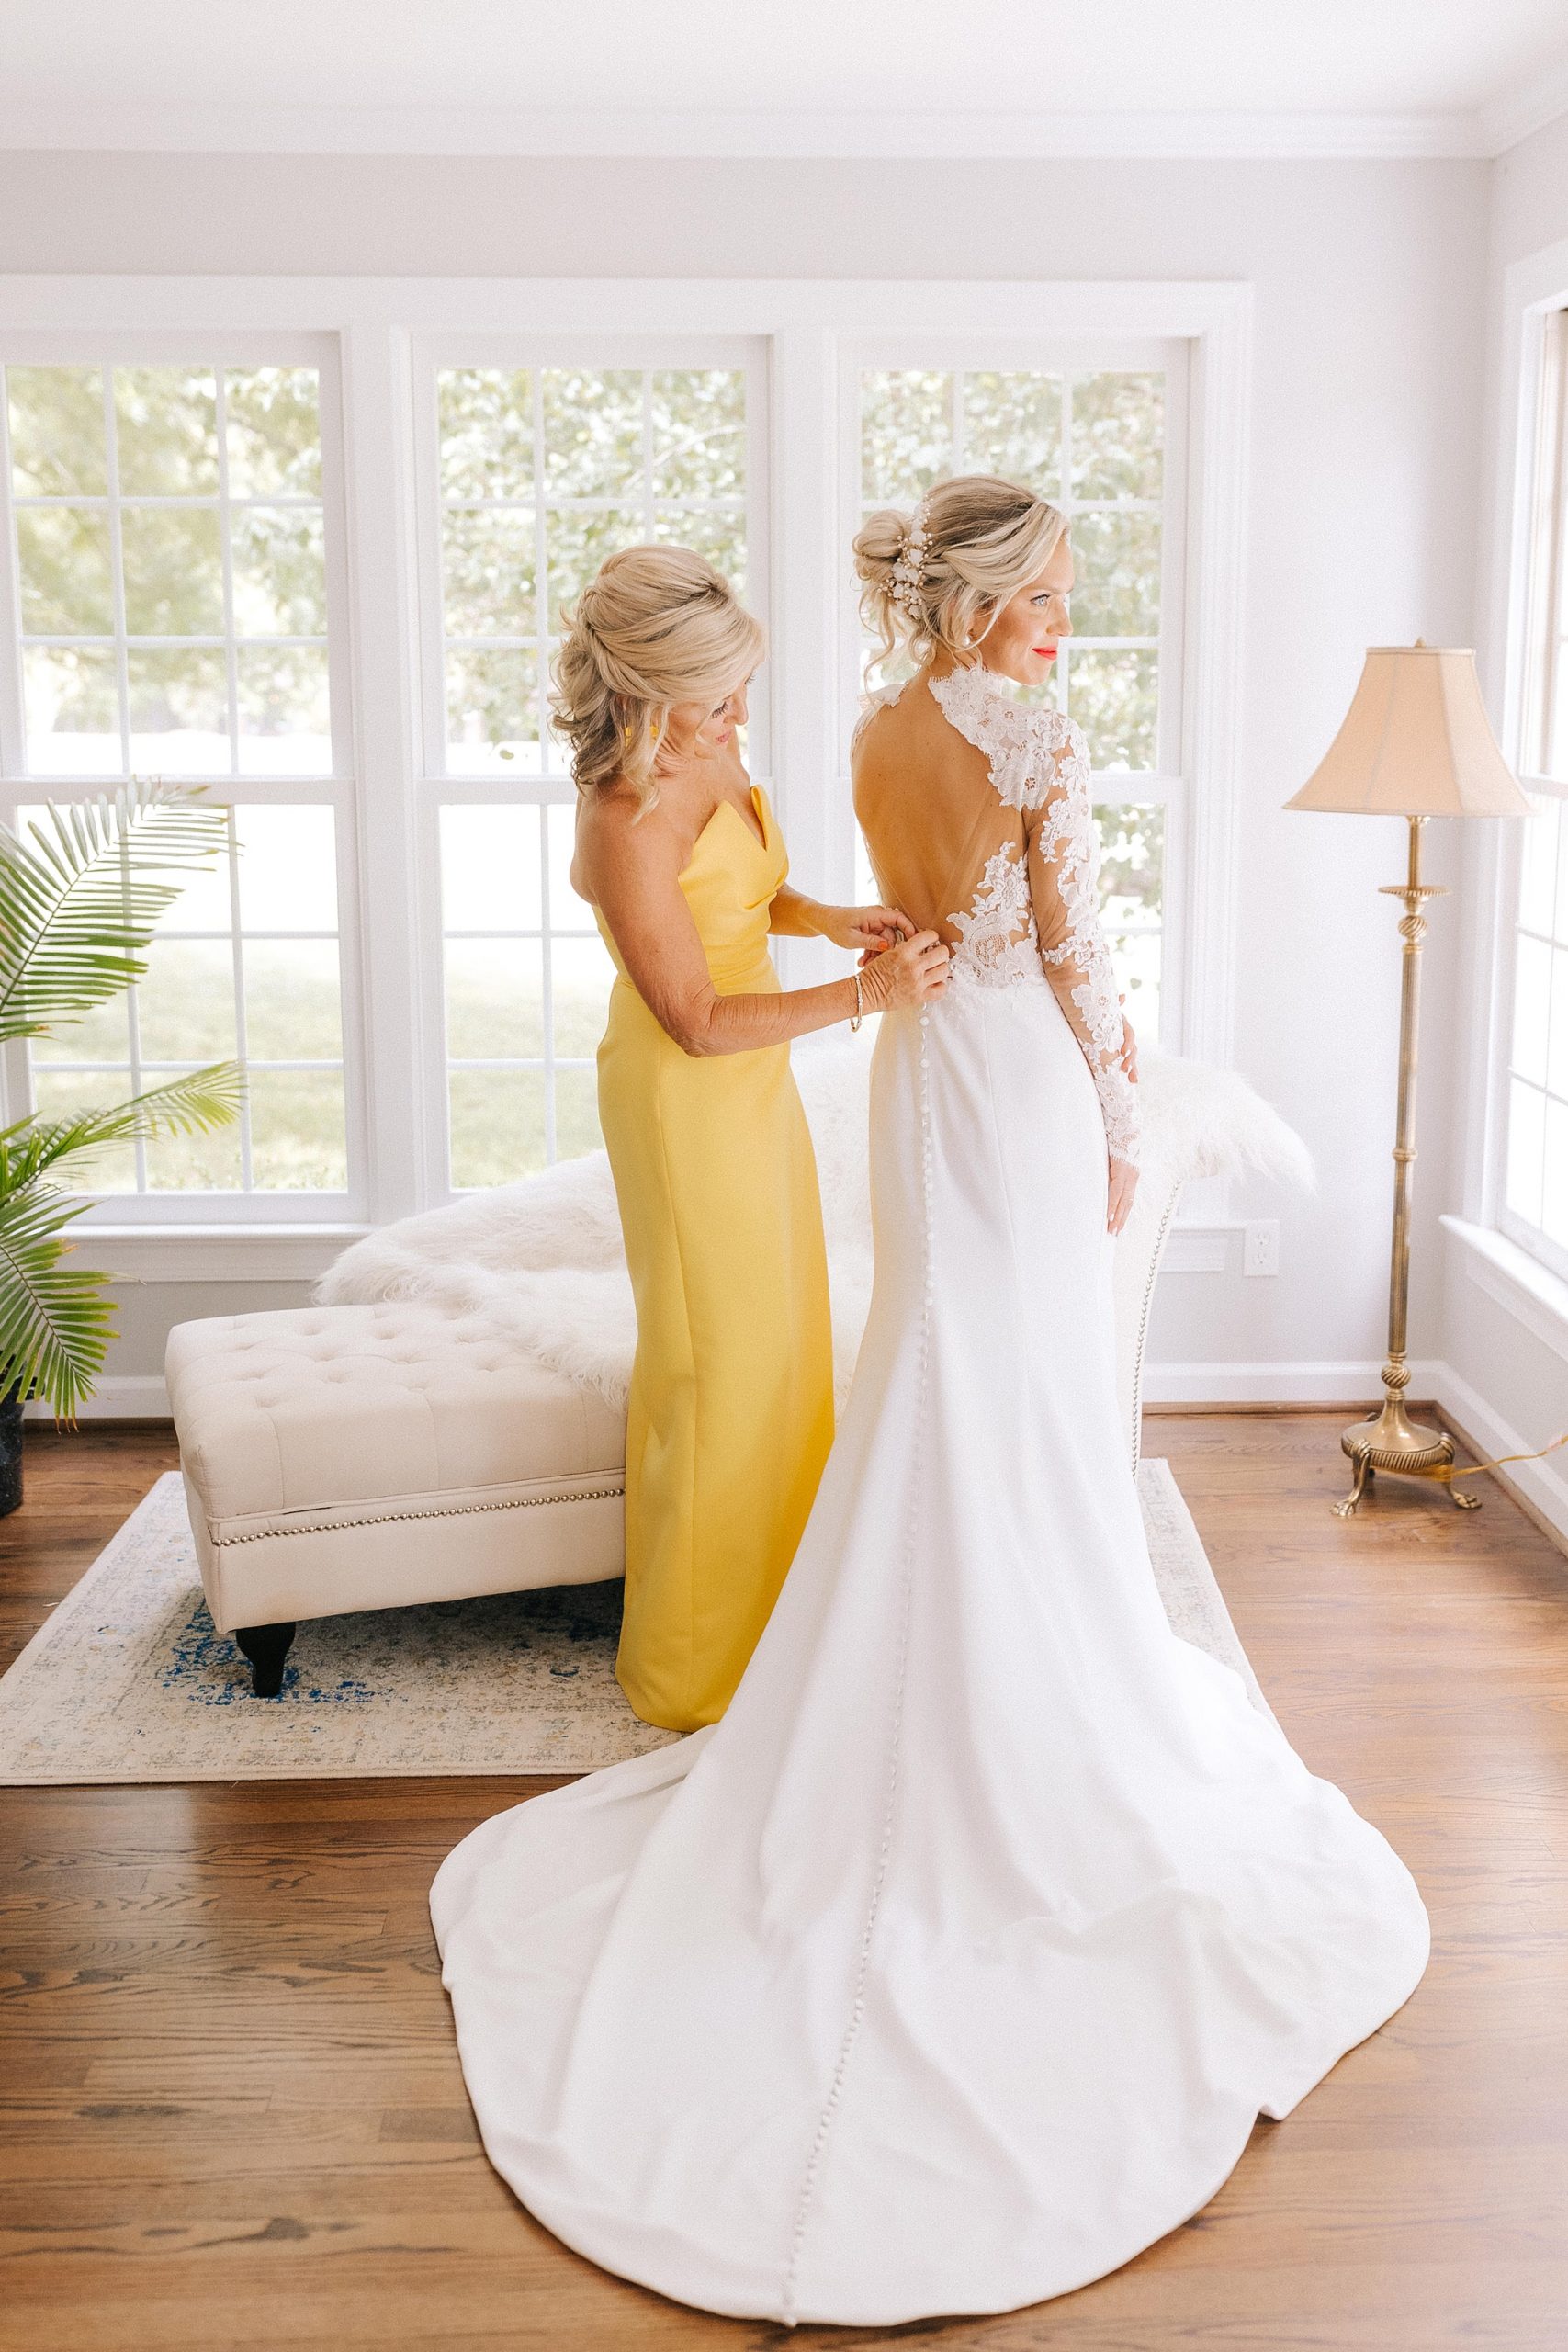 mother of the bride in yellow dress helps bride with wedding gown